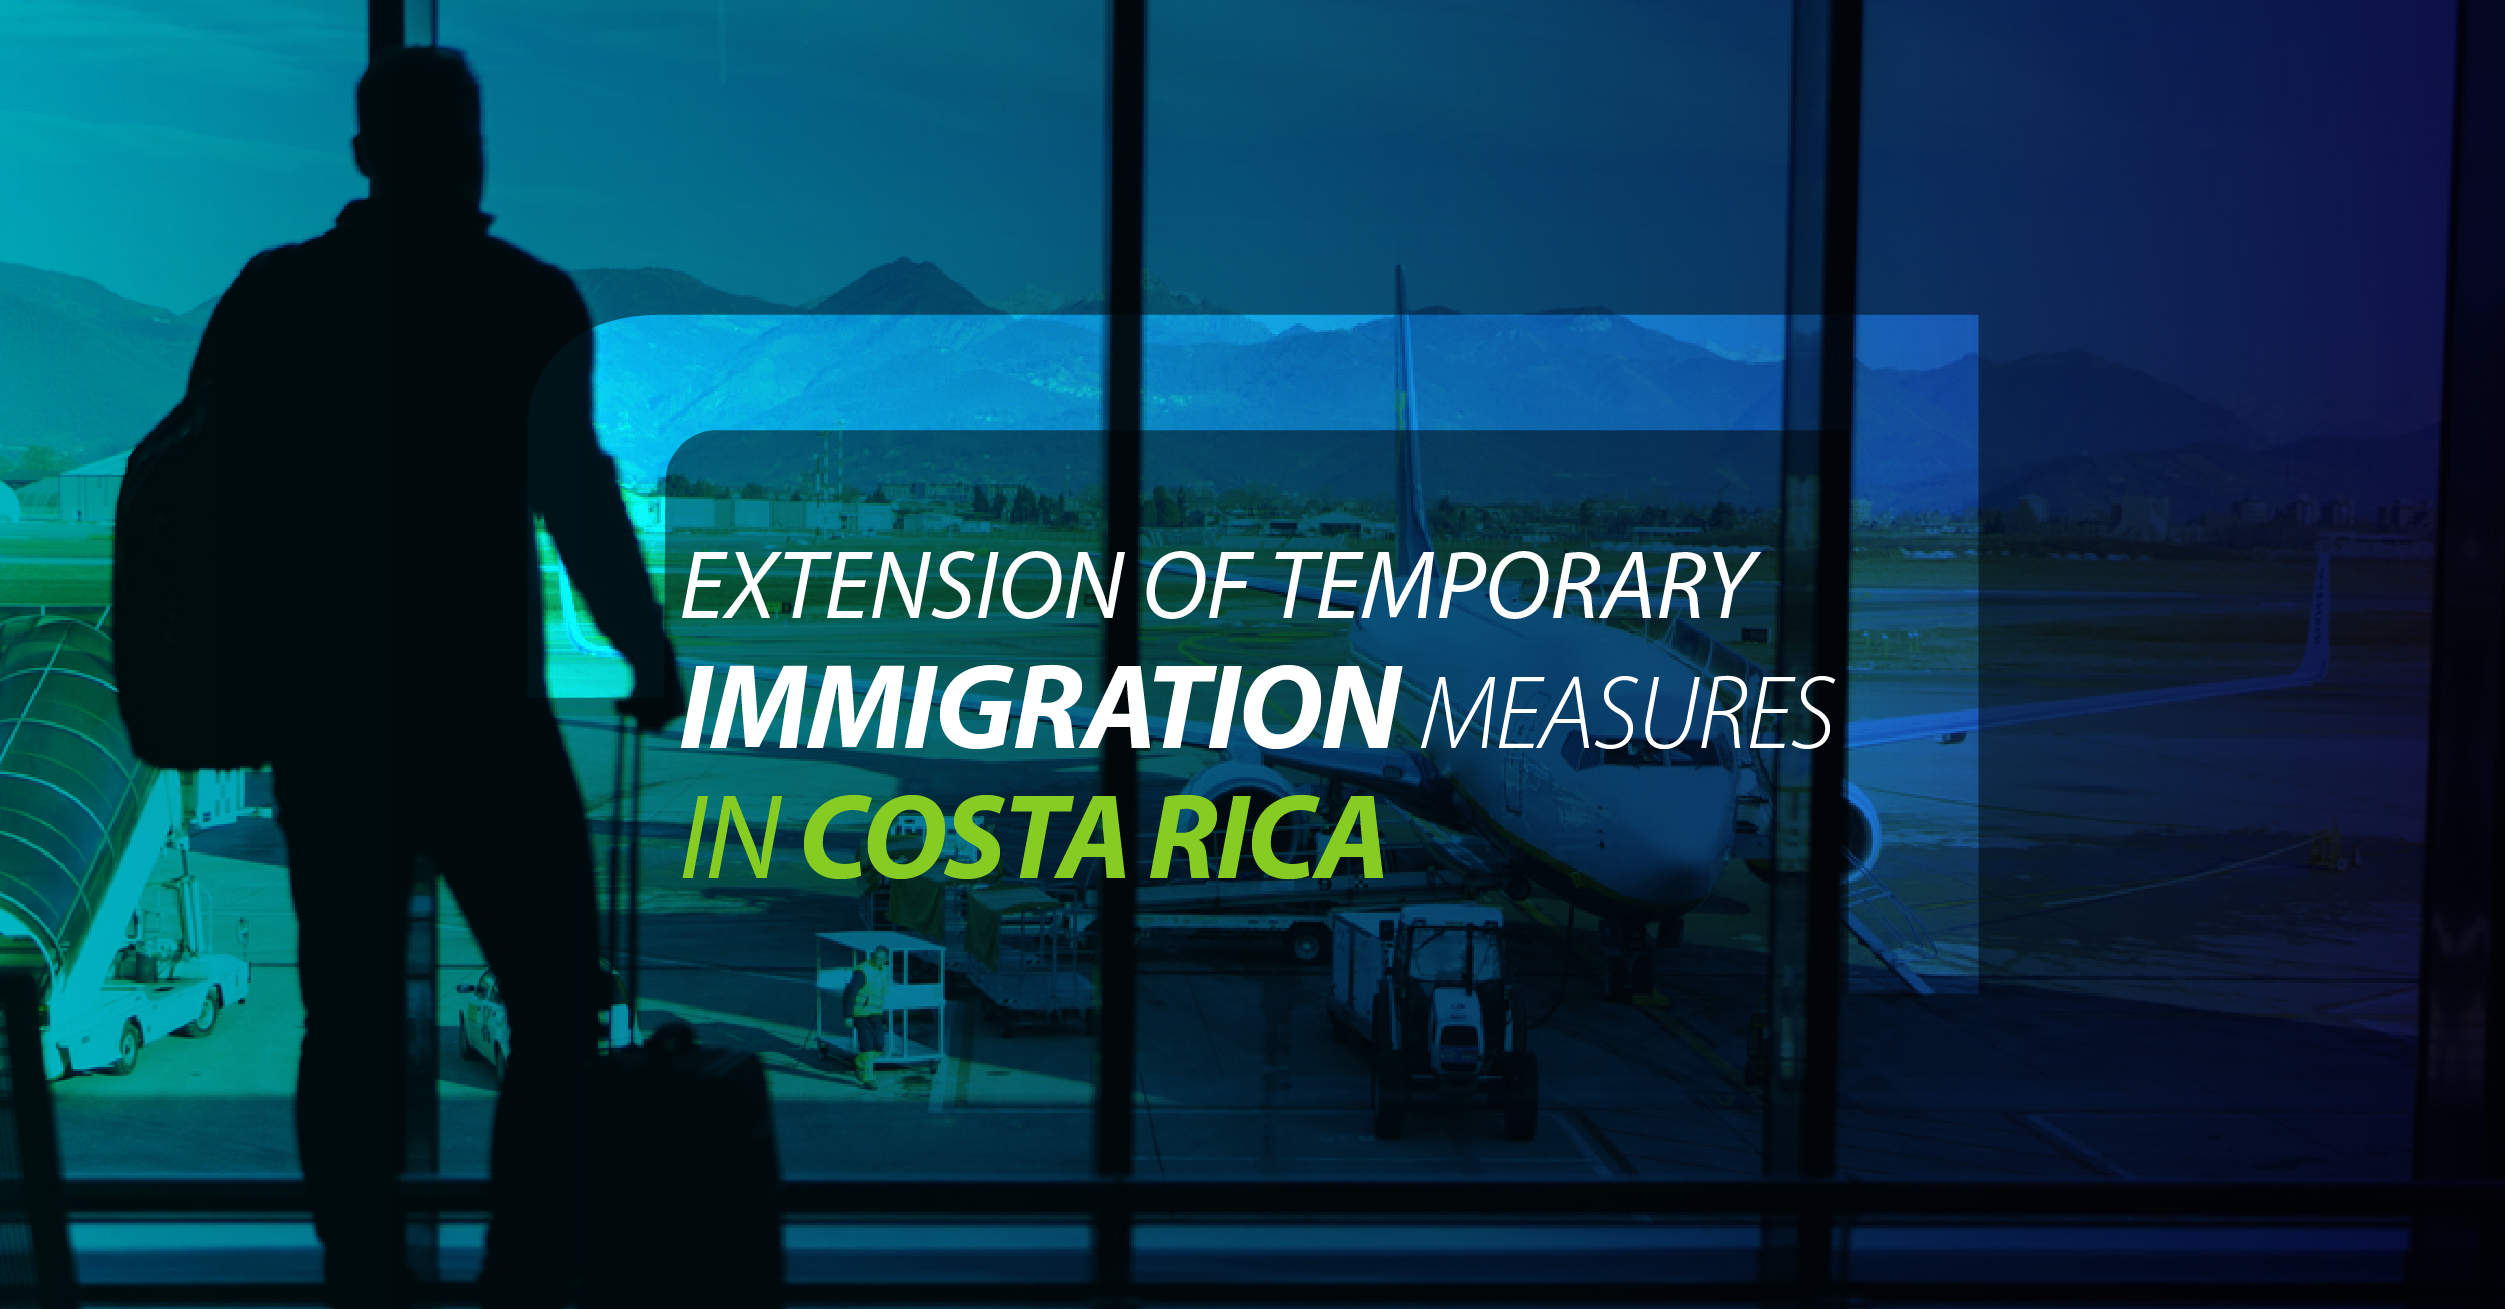 Extension of temporary immigration measures in Costa Rica